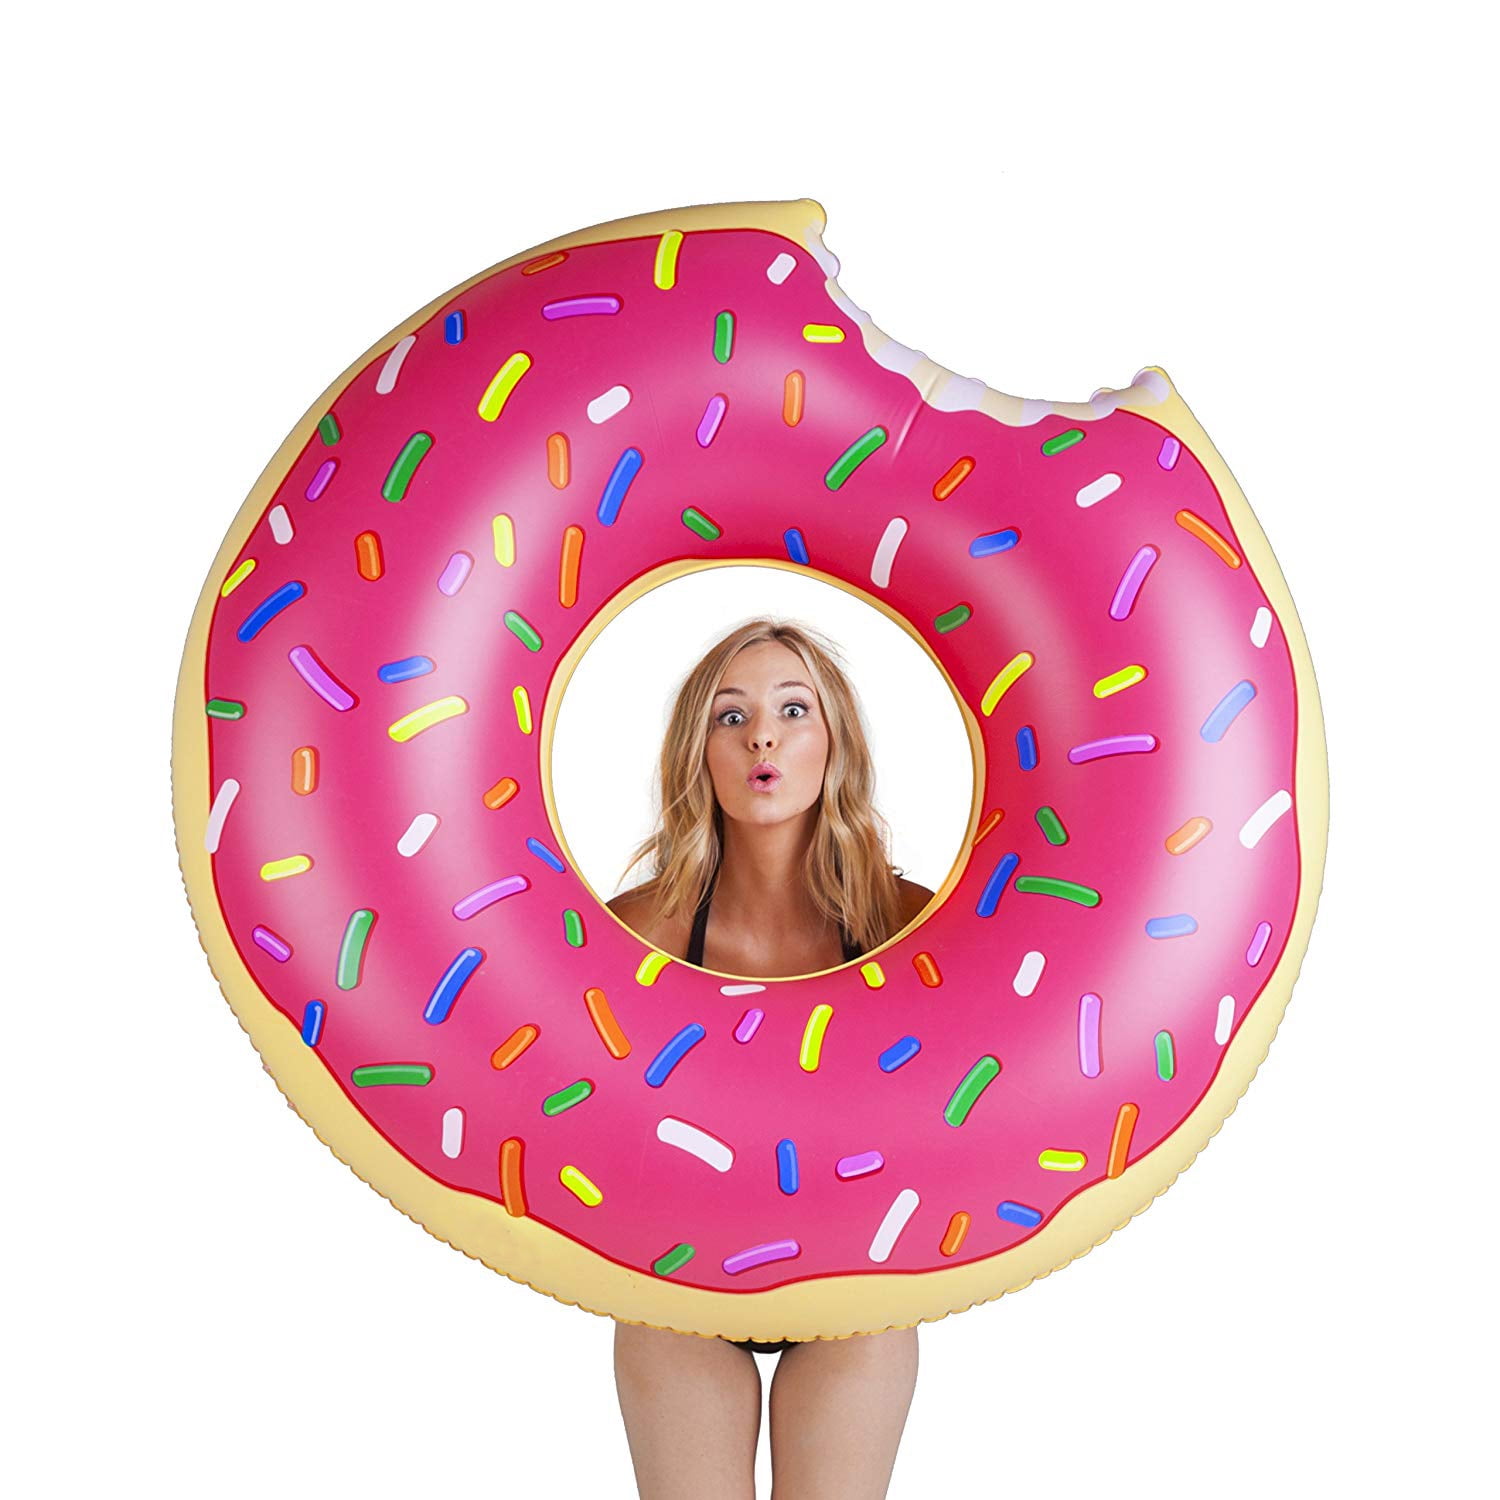 X2 Inflatable Donut Swim Ring Tube Pool Float Lounger Beach Swimming Toy 